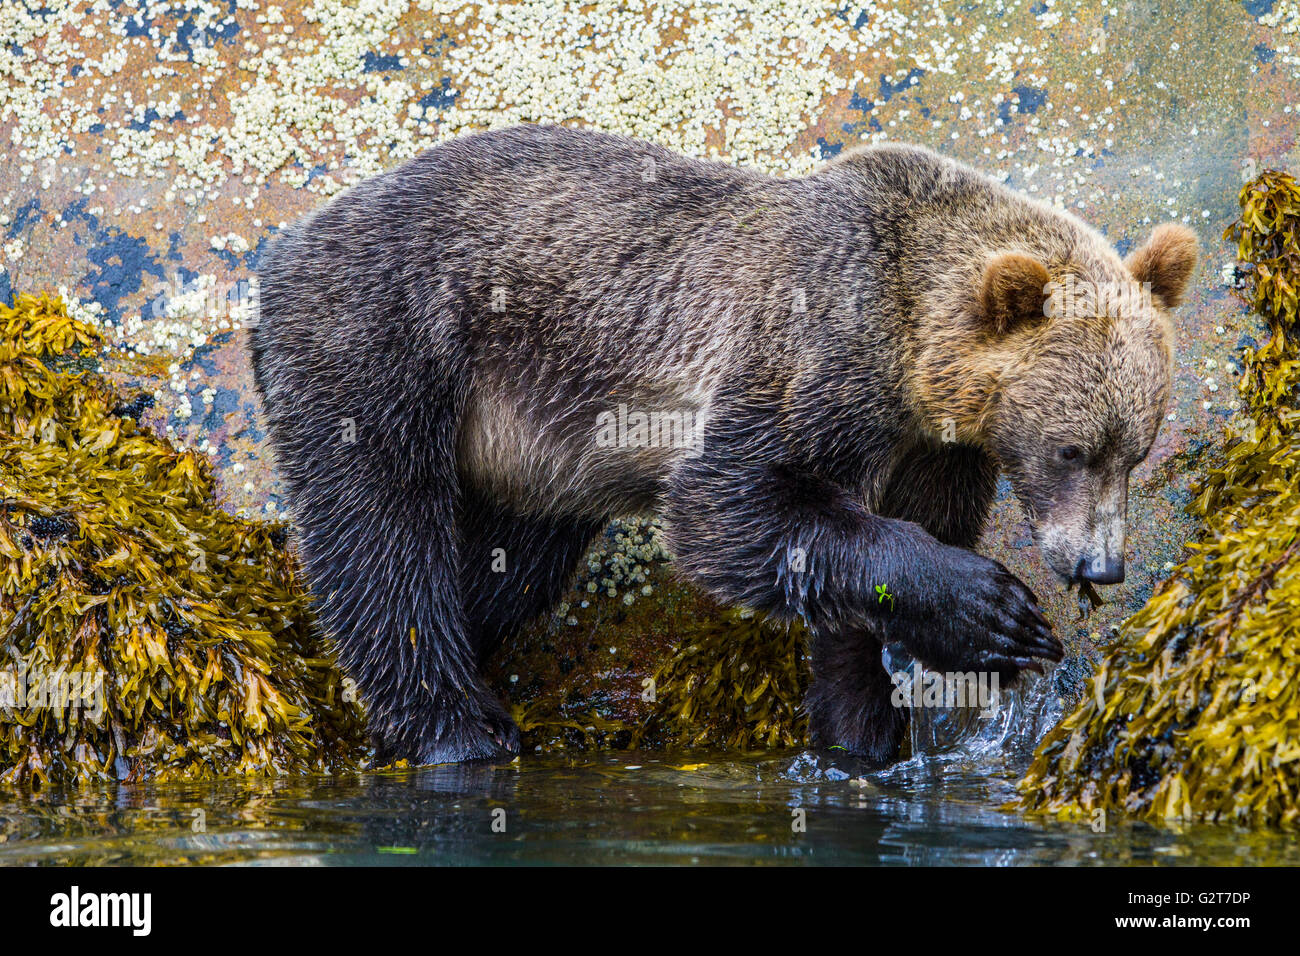 Grizzly bear foraging along low tide line, Knight Inlet, British Columbia Stock Photo